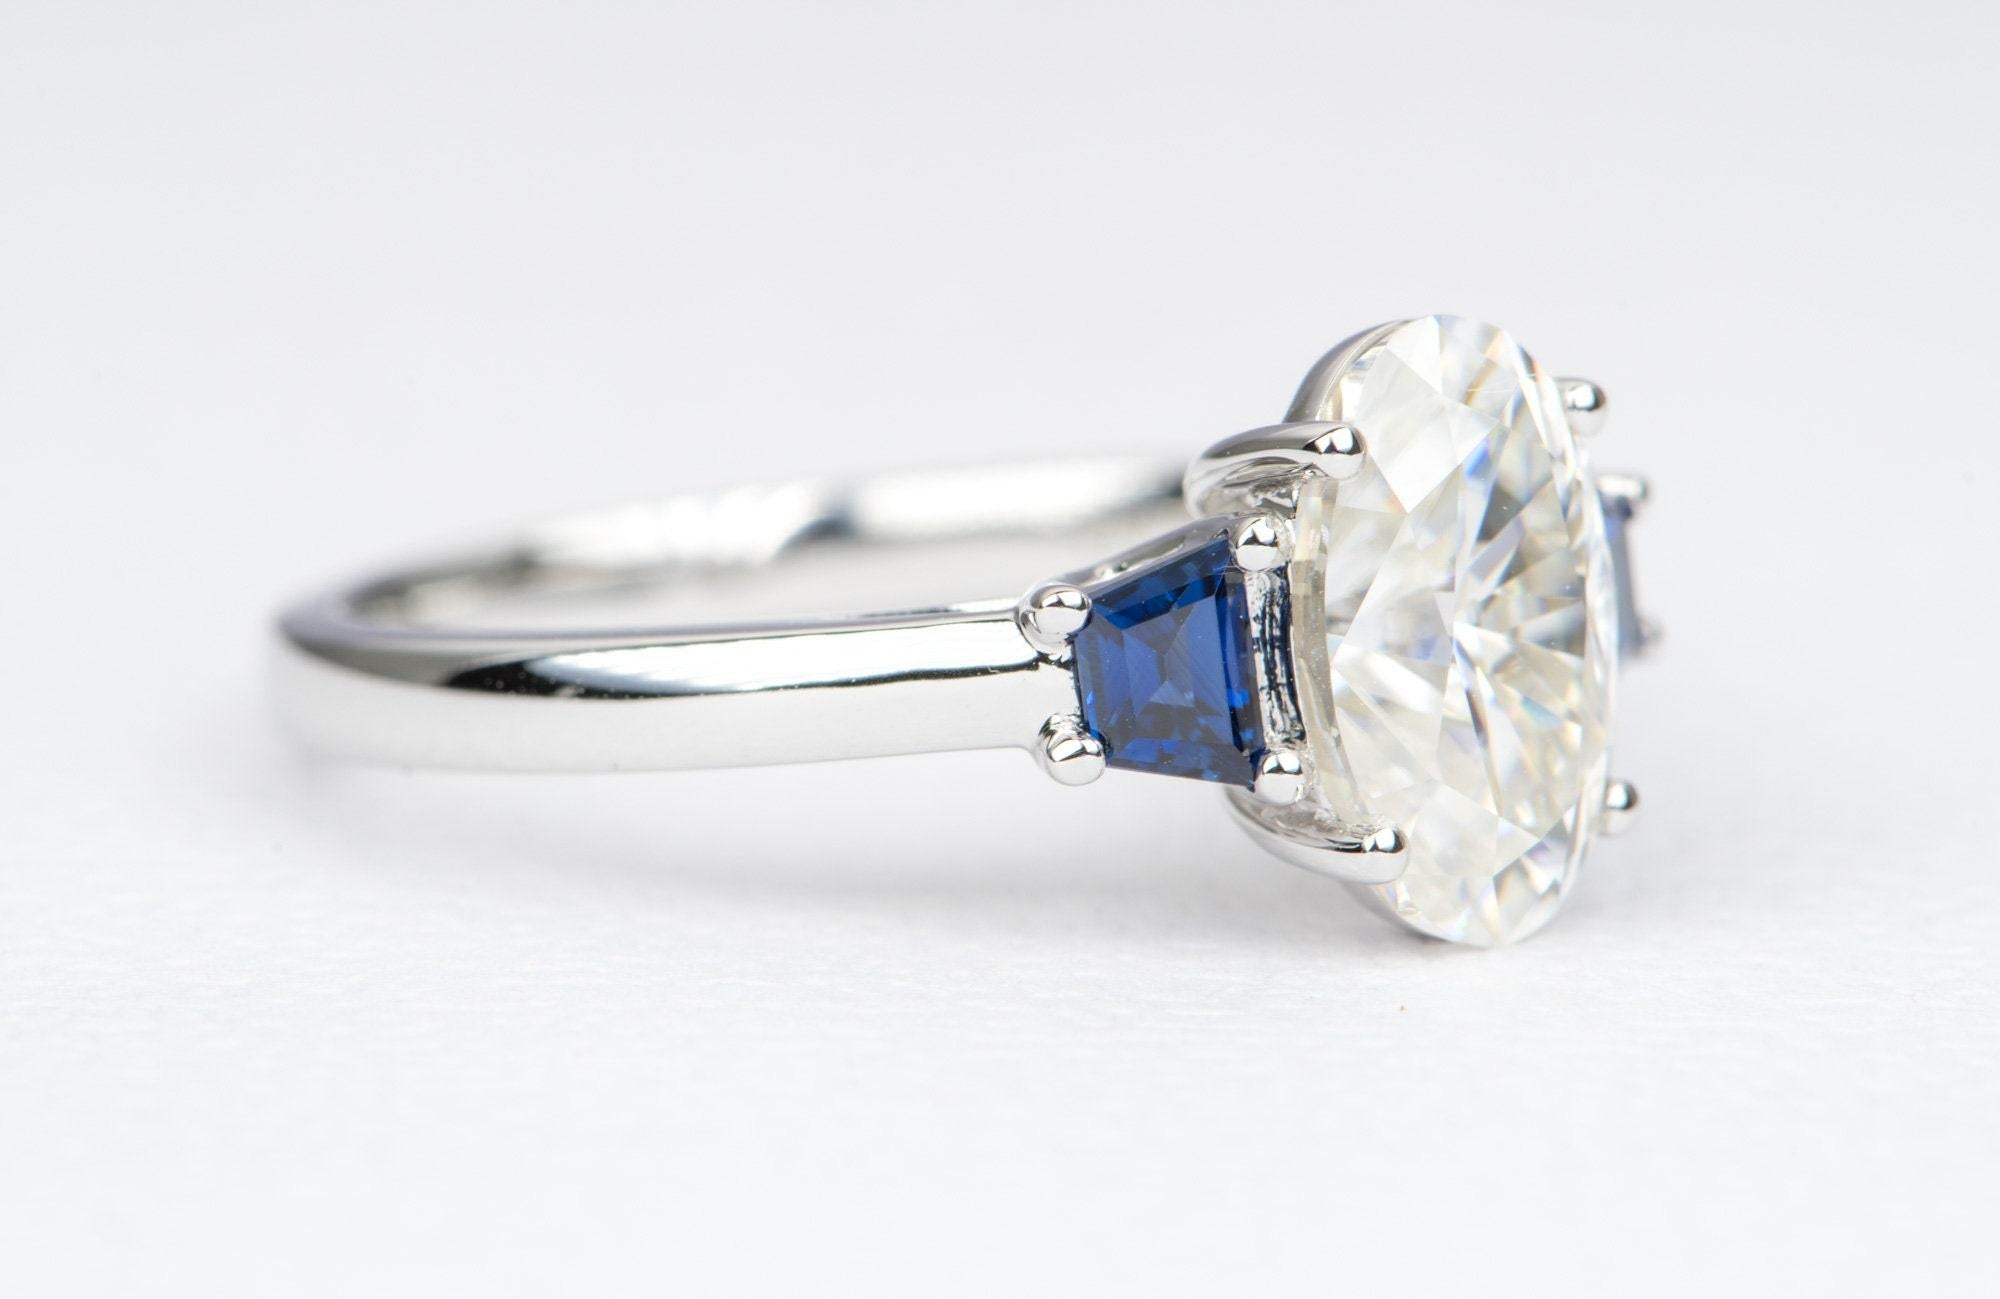 â™¥  A solid 14k white gold ring set with a elongated oval moissanite, flanked with trapezoid-shaped teal blue sapphire sides and a trellis-style open gallery to accent the center stone
â™¥  The overall setting measures 13mm in width, 10mm in